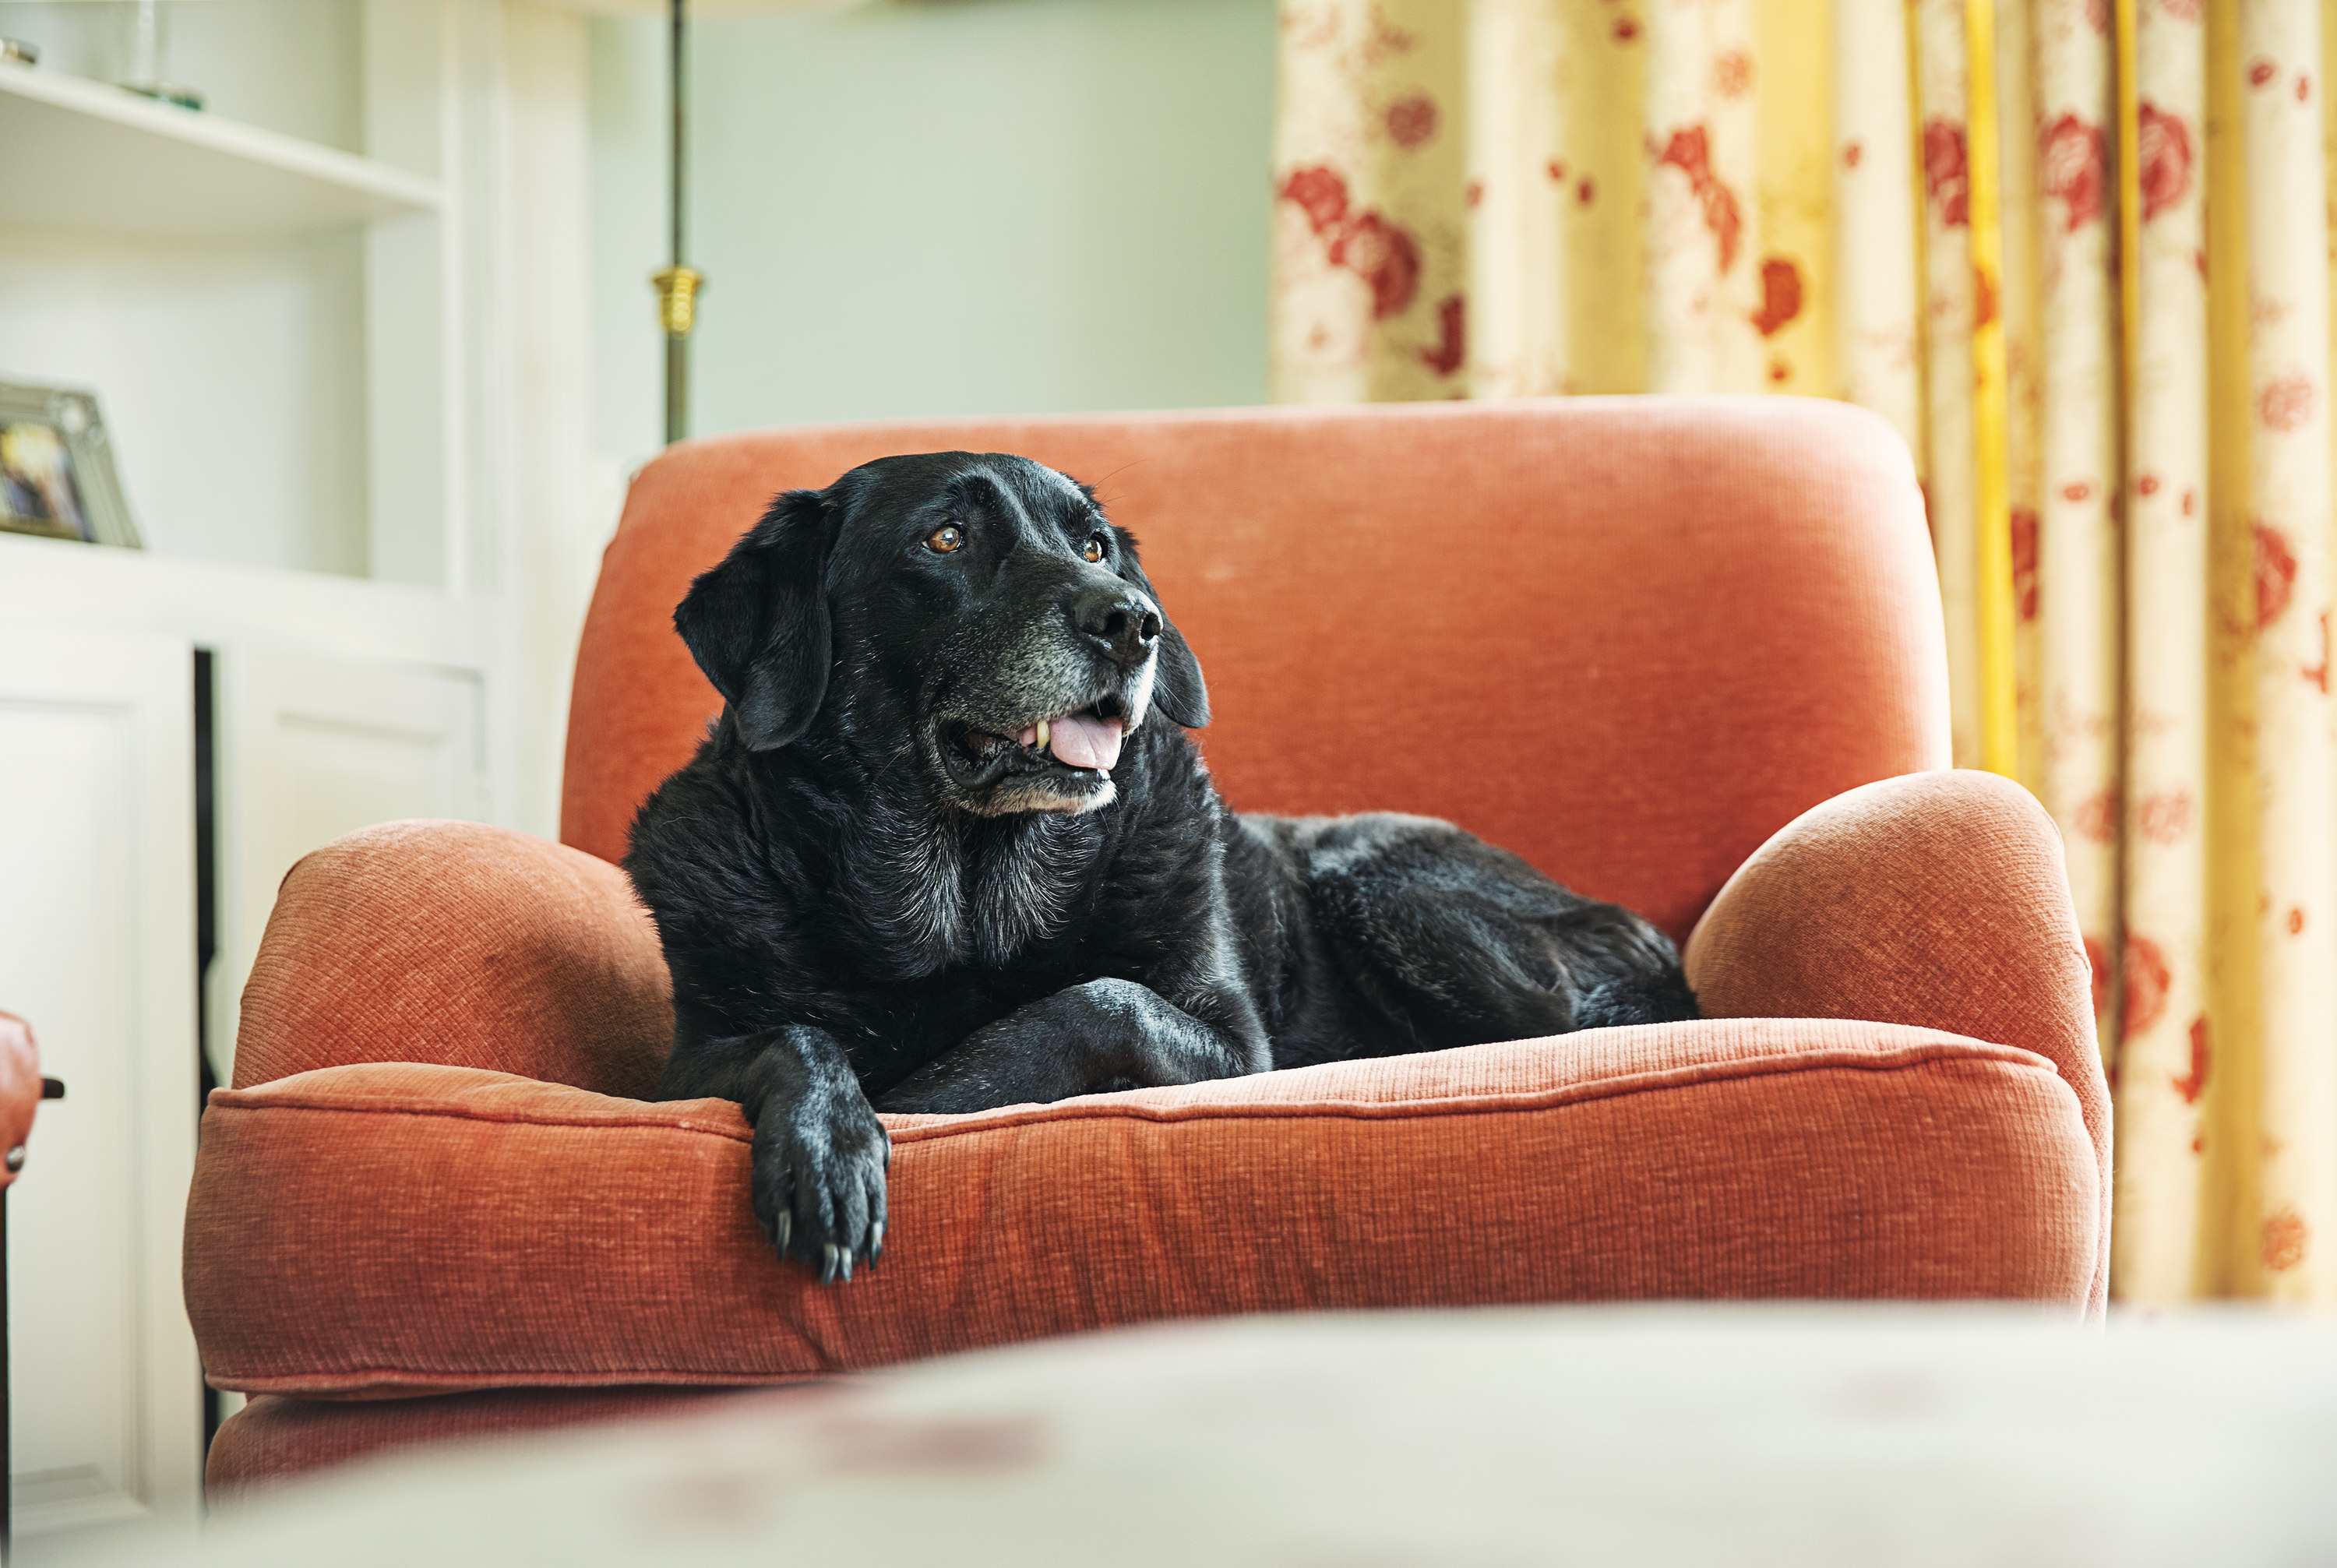 A big dog chilling out in a comfy armchair